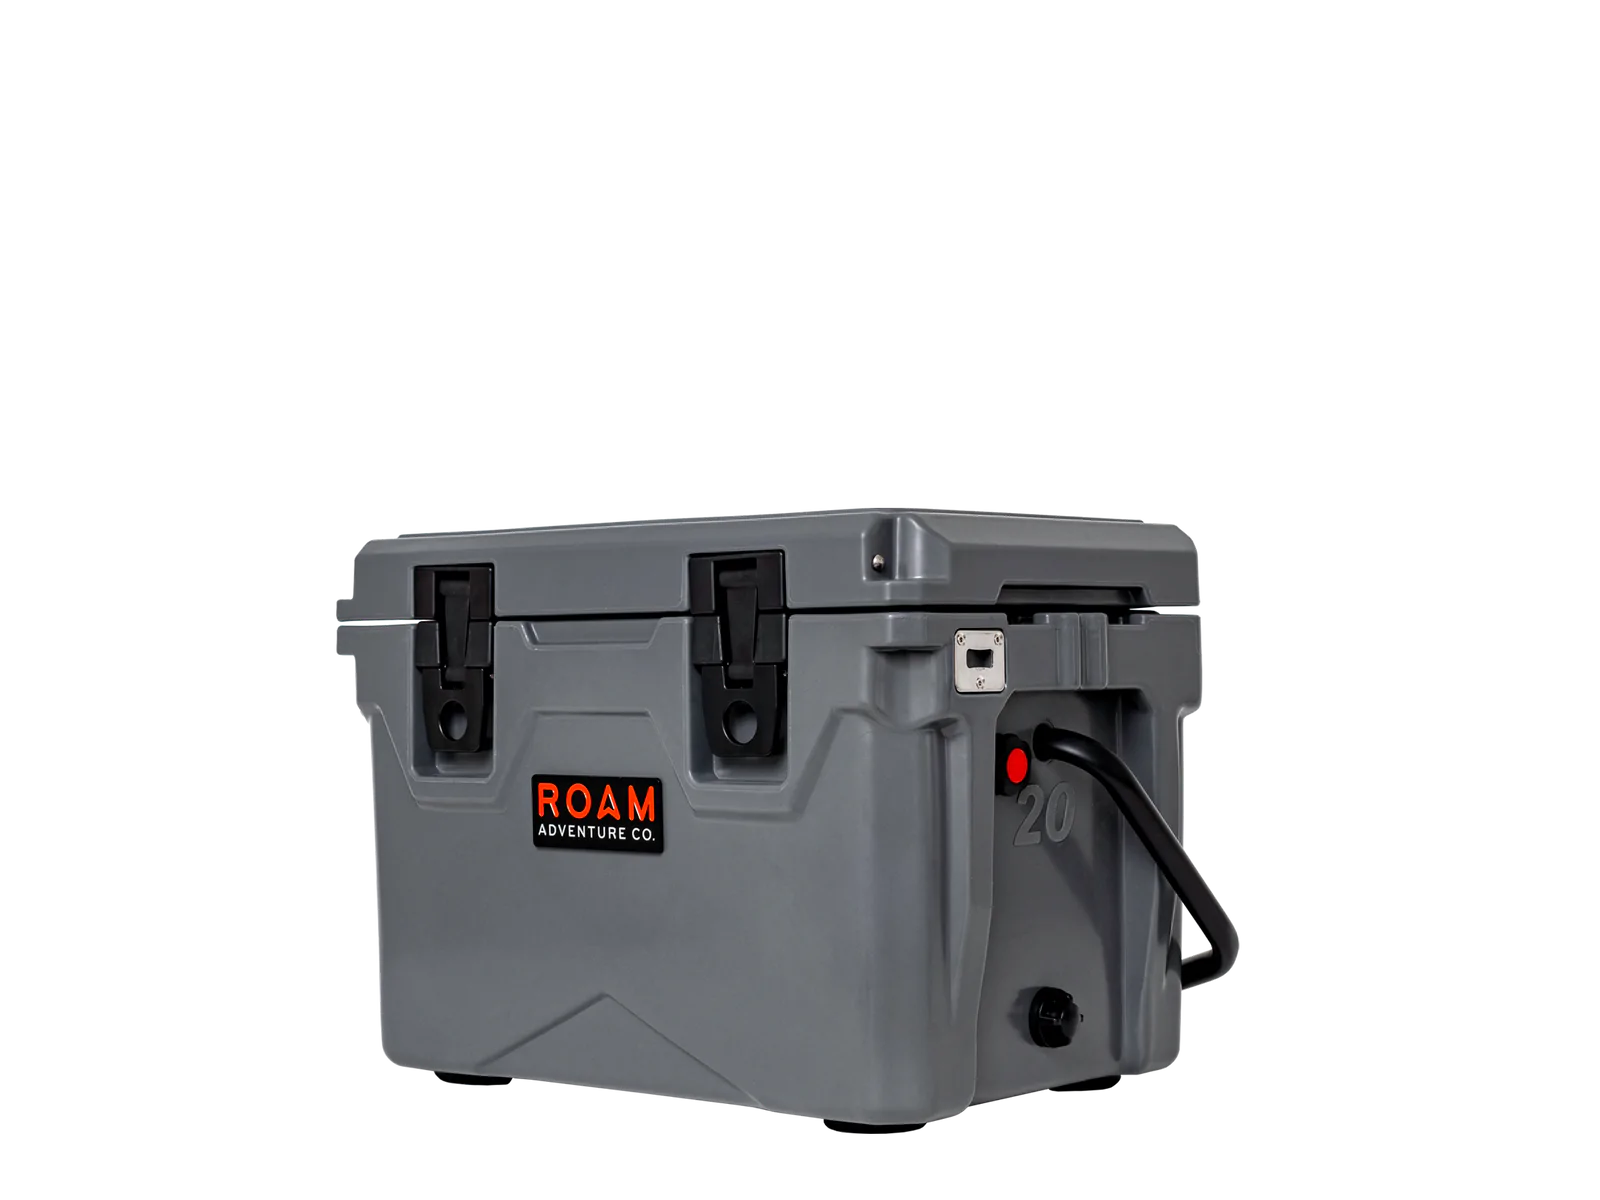 roam adventure co rugged cooler icechest for sale near houston texas at hawkes outdoors 2102512882